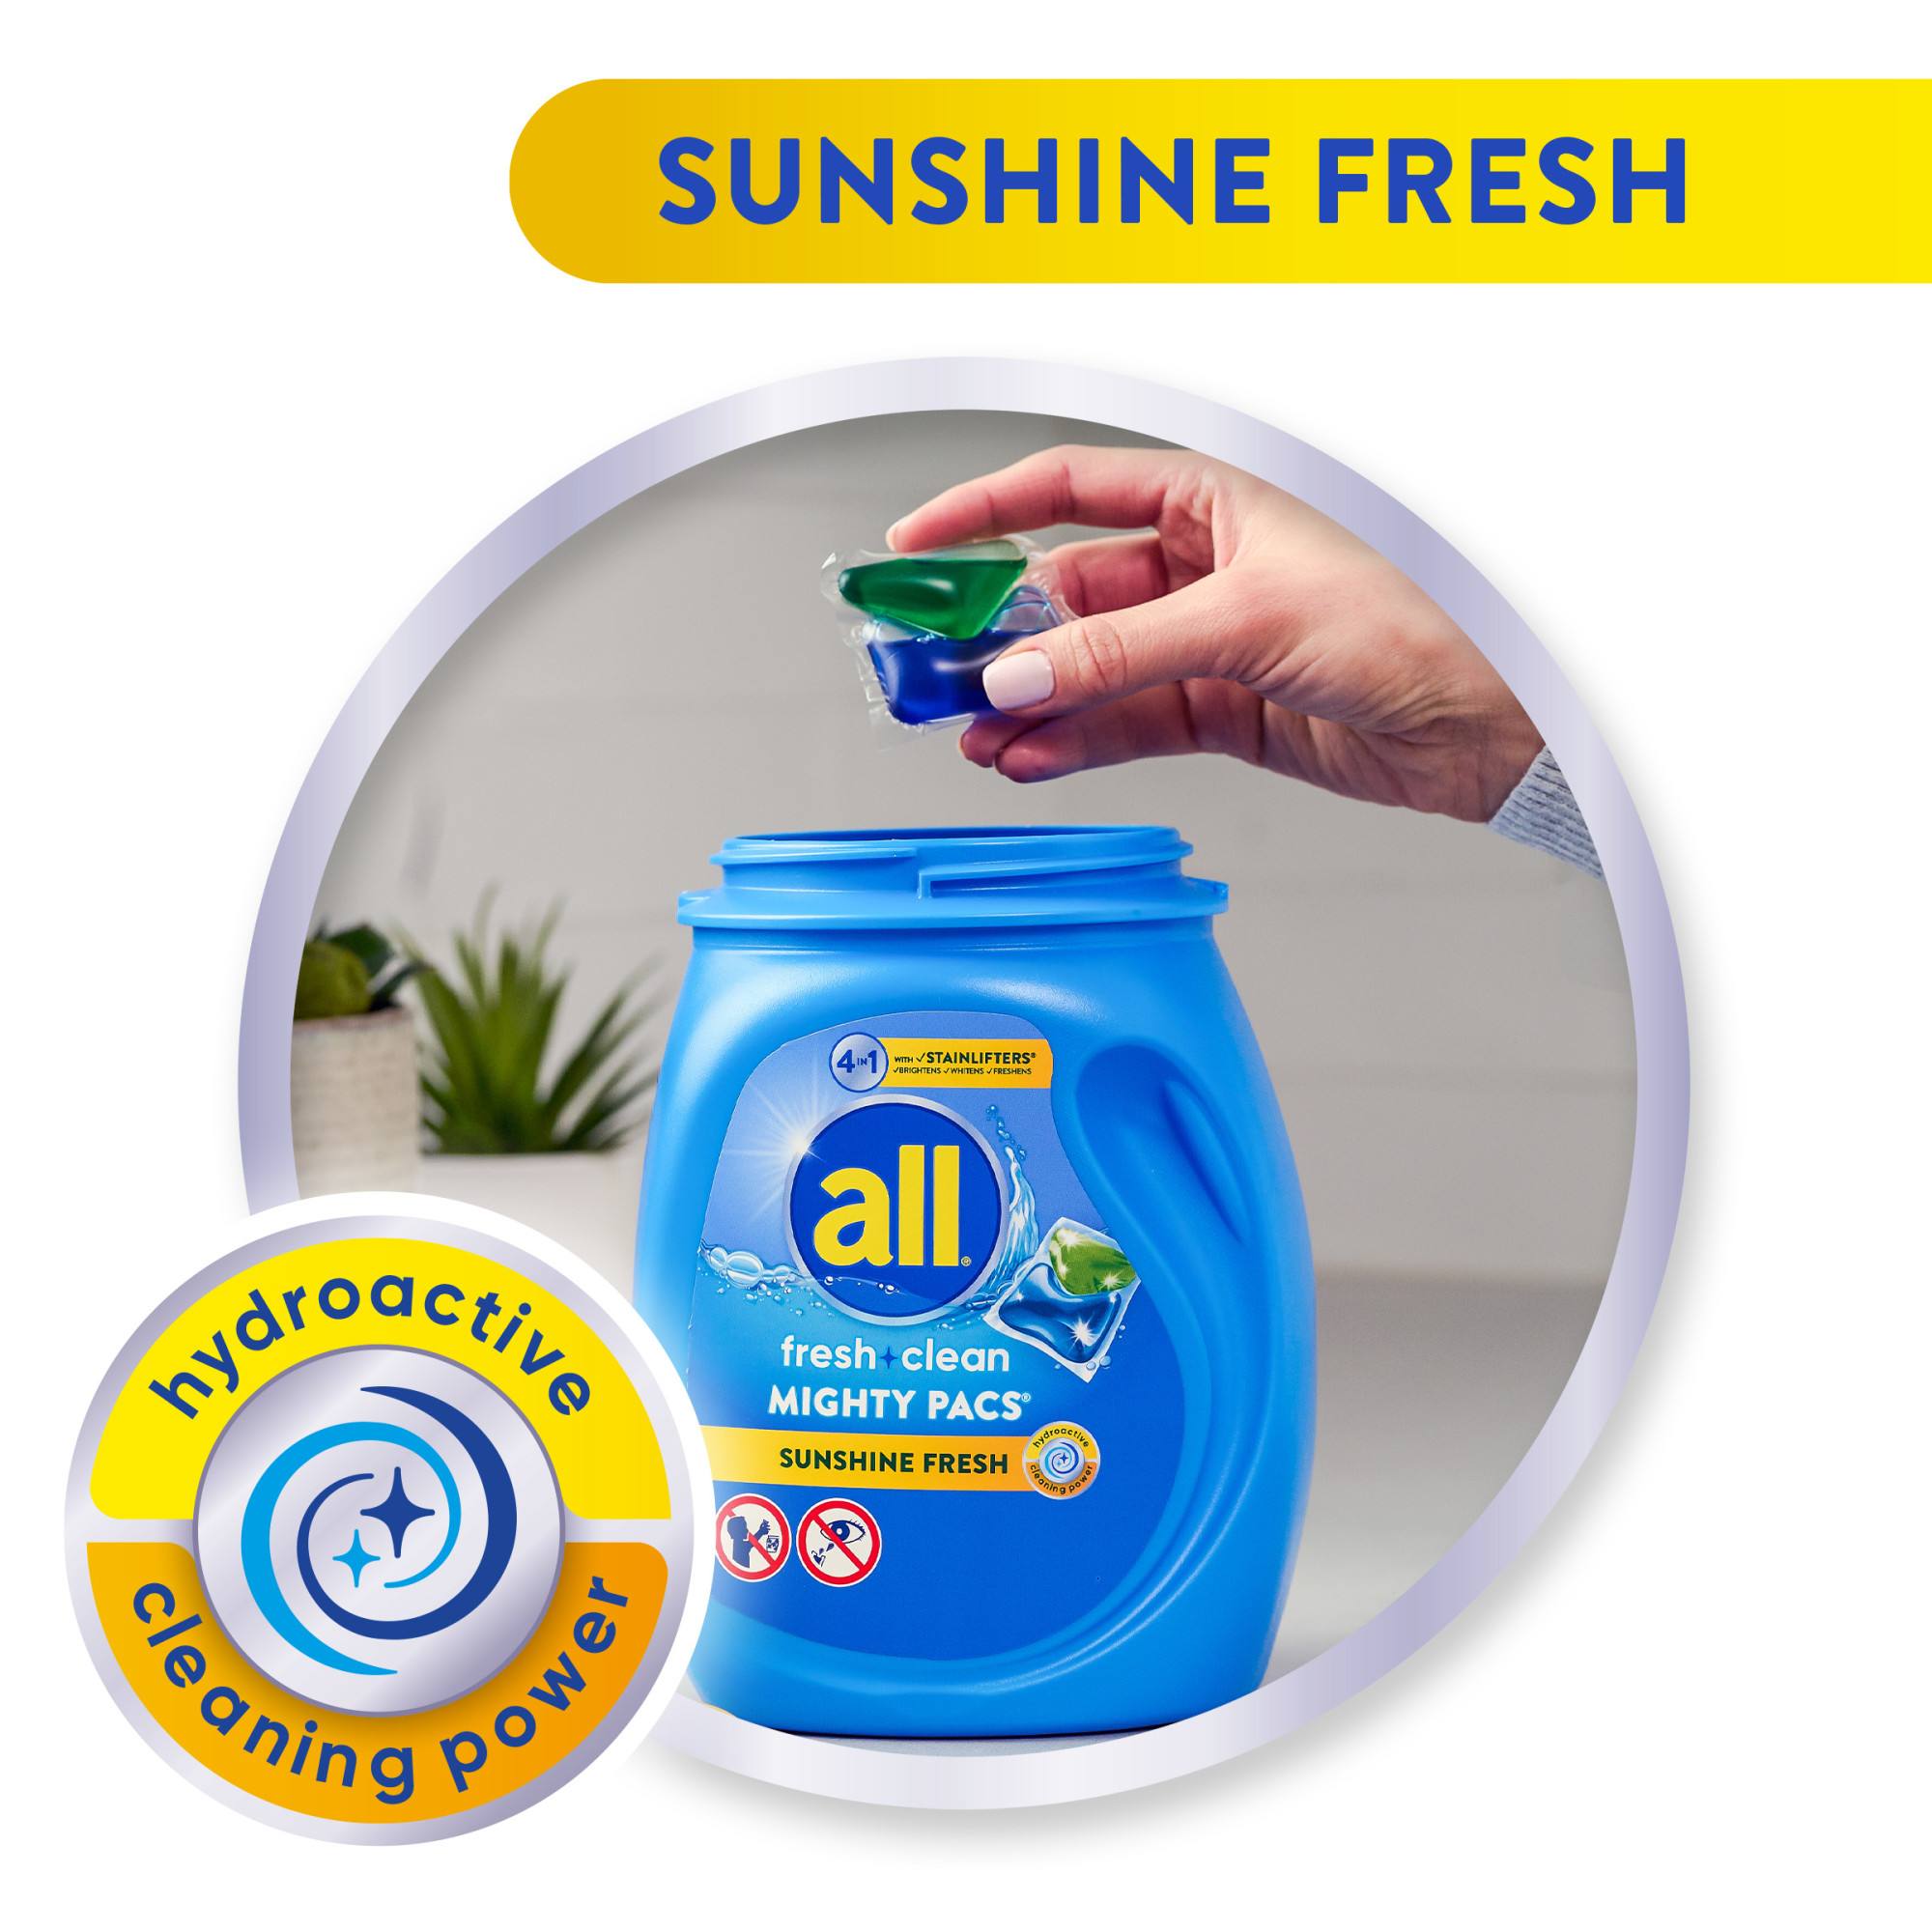 all Mighty Pacs Laundry Detergent Pacs, Fresh Clean 4 in 1 with Stainlifters, Sunshine Fresh, 75 Count - image 2 of 6